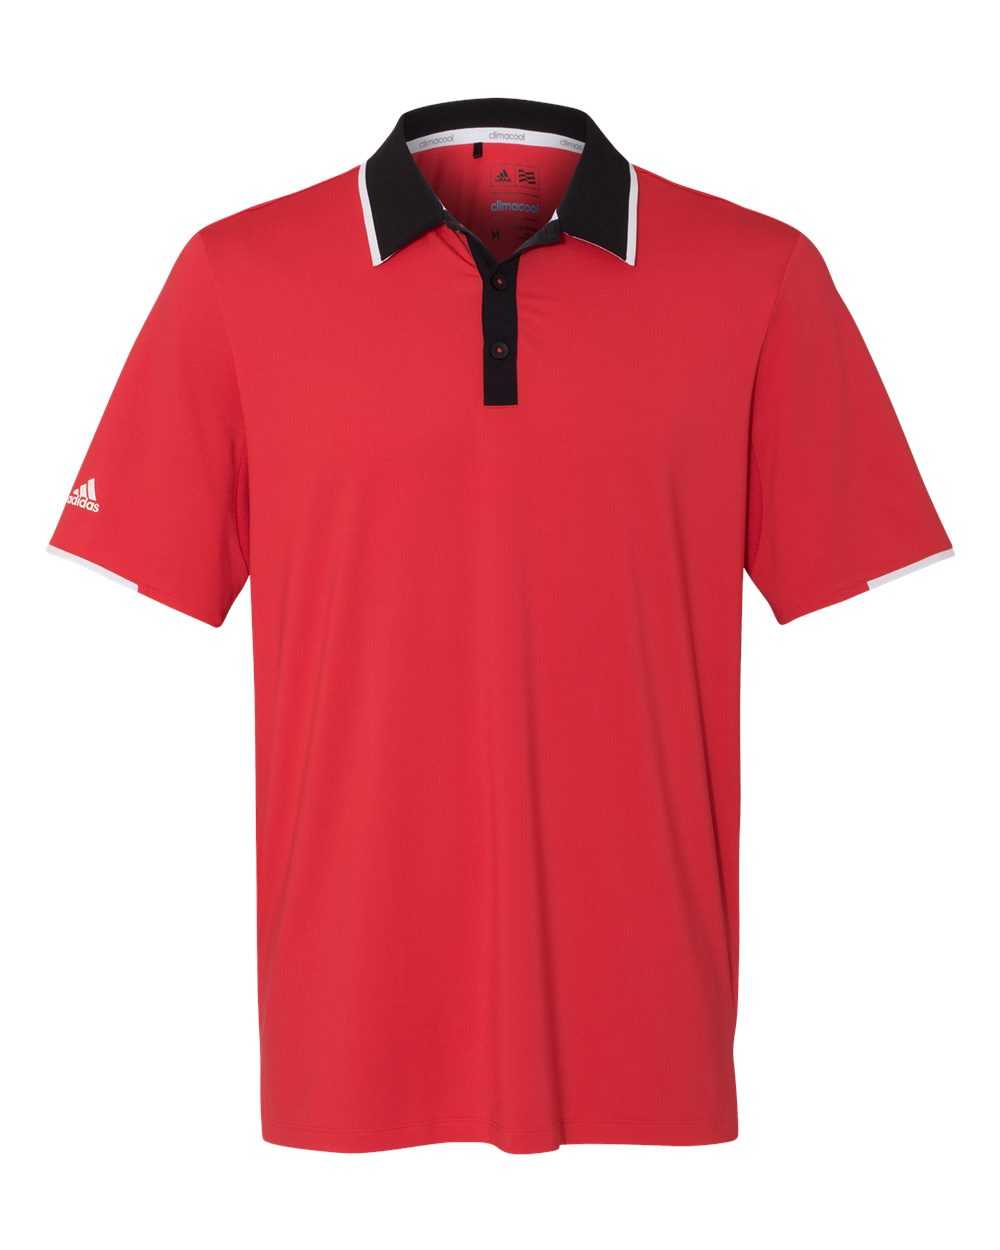 Adidas A166 Performance Colorblock Sport Shirt - Ray Red Black White